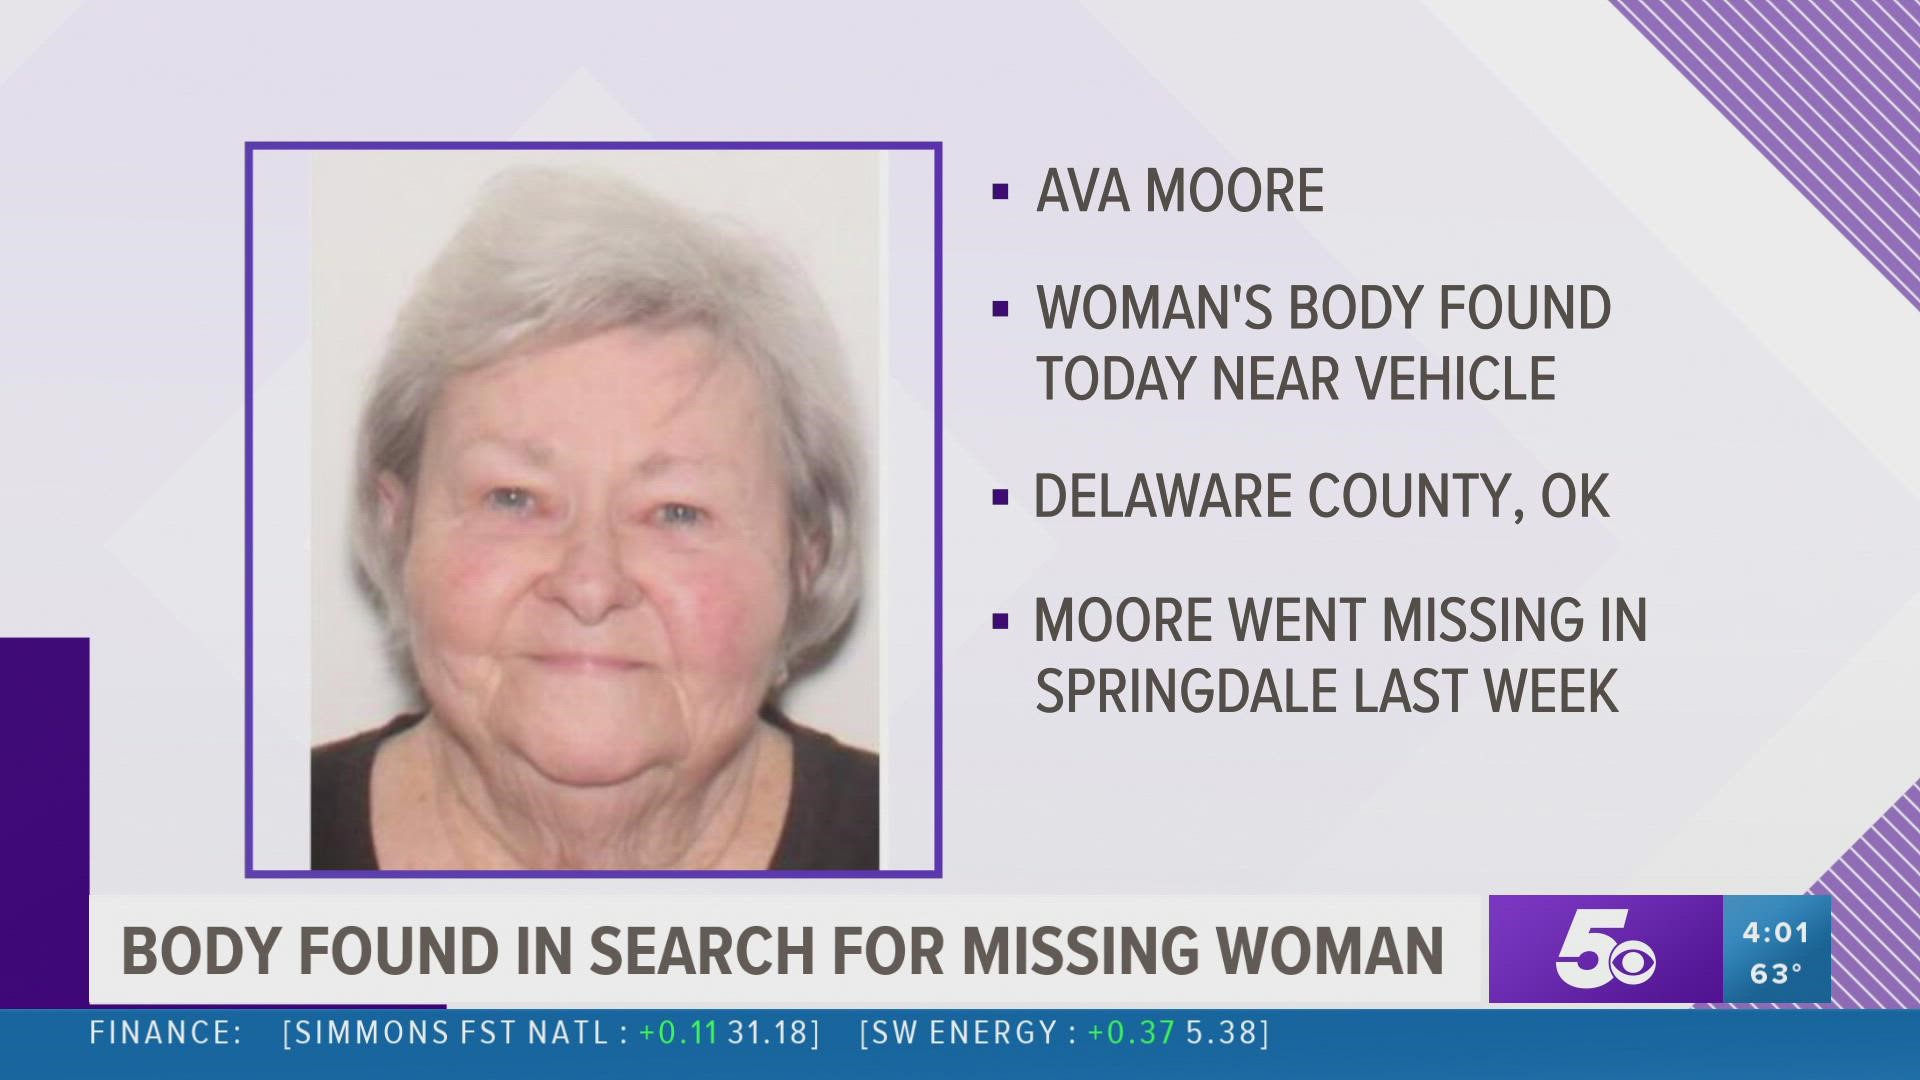 Update: Police have located a body near Ava Moore's vehicle, which was recovered in Oklahoma. Police have not identified the body as belonging to Moore.